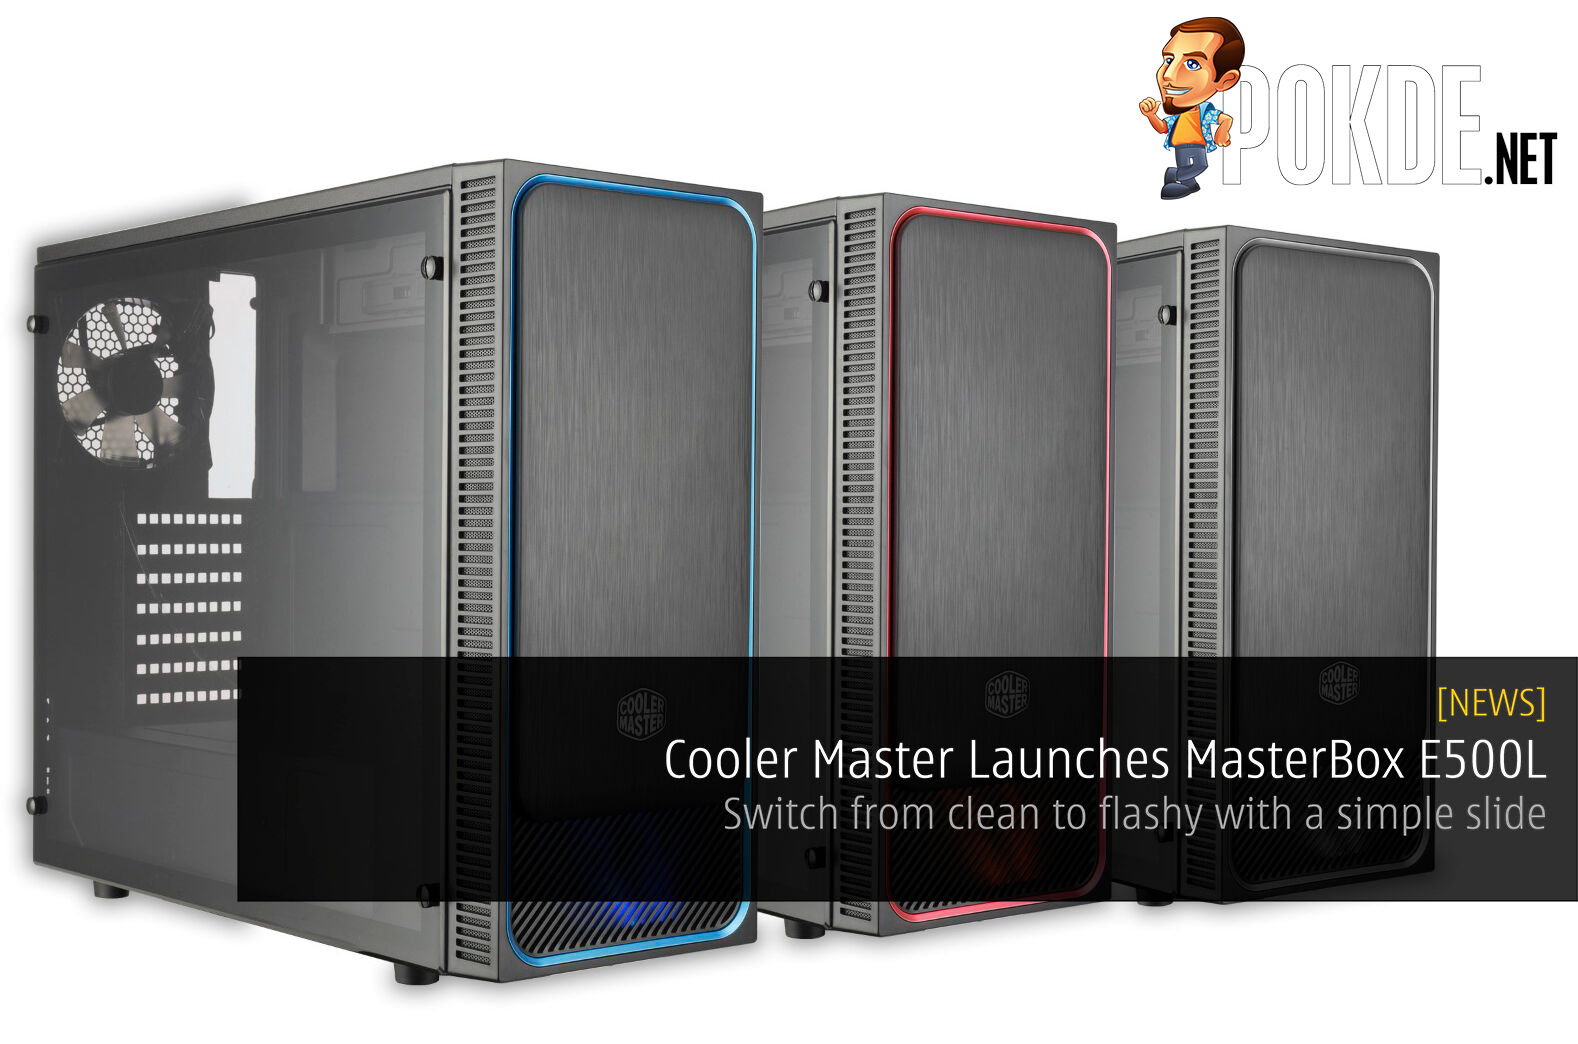 Cooler Master Launches MasterBox E500L - Switch from clean to flashy with a simple slide 30